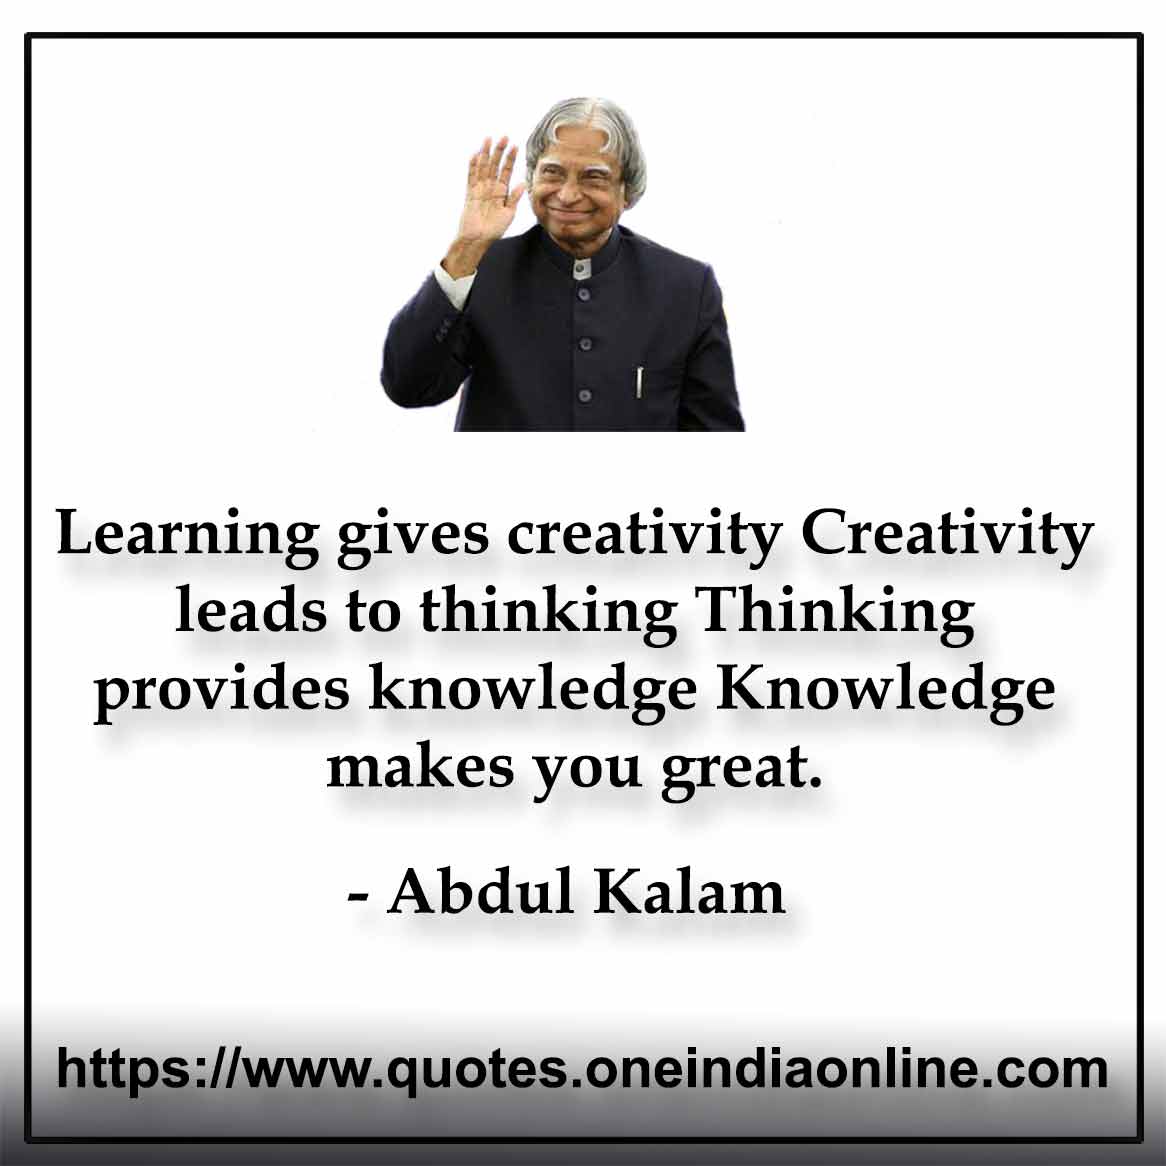 Learning gives creativity Creativity leads to thinking Thinking provides knowledge Knowledge makes you great.